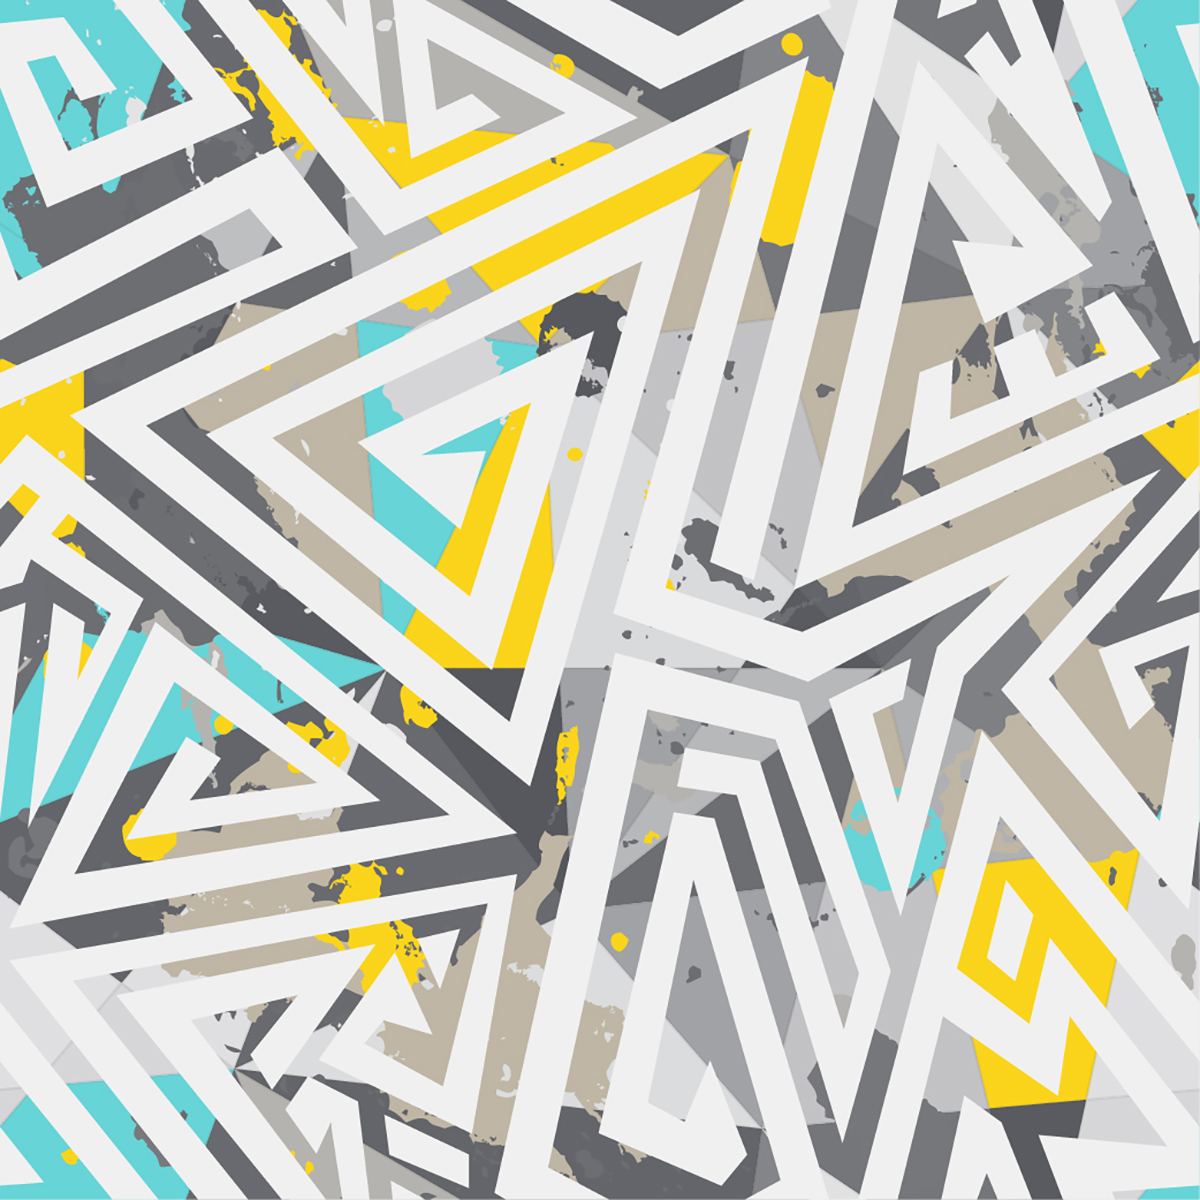 A pattern of white lines and yellow and blue colors